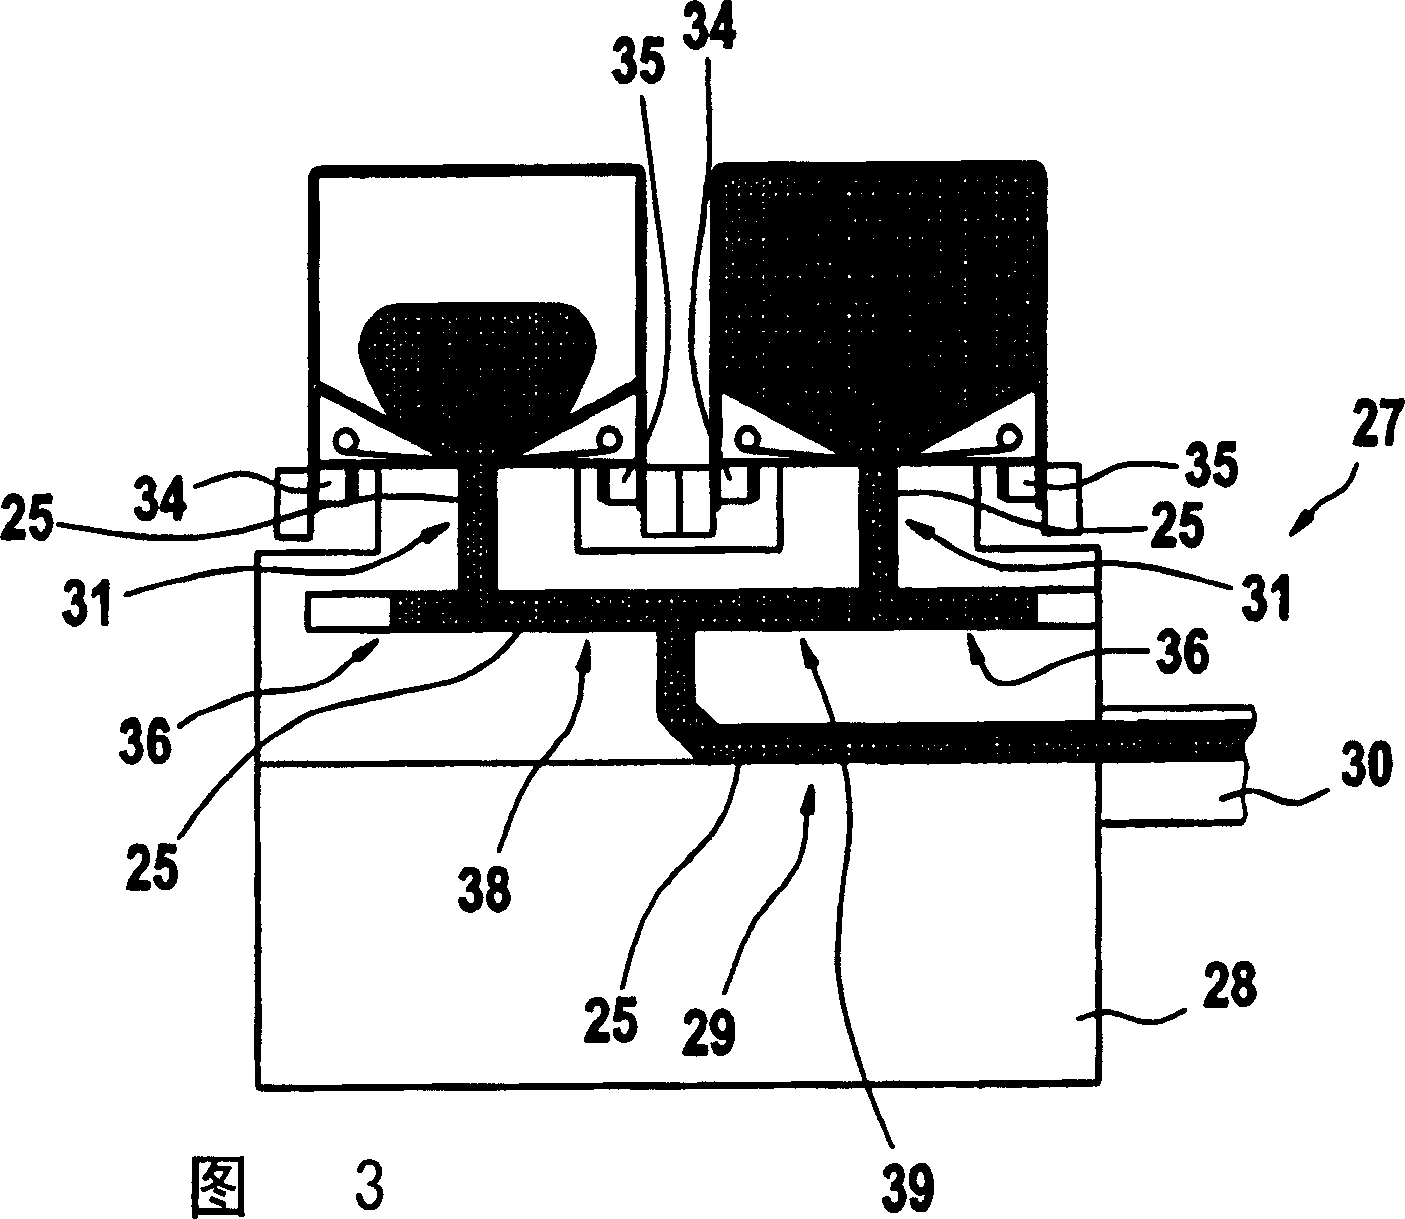 Storing apparatus for rod-shaped articles and apparatus and method for filling storing apparatuses